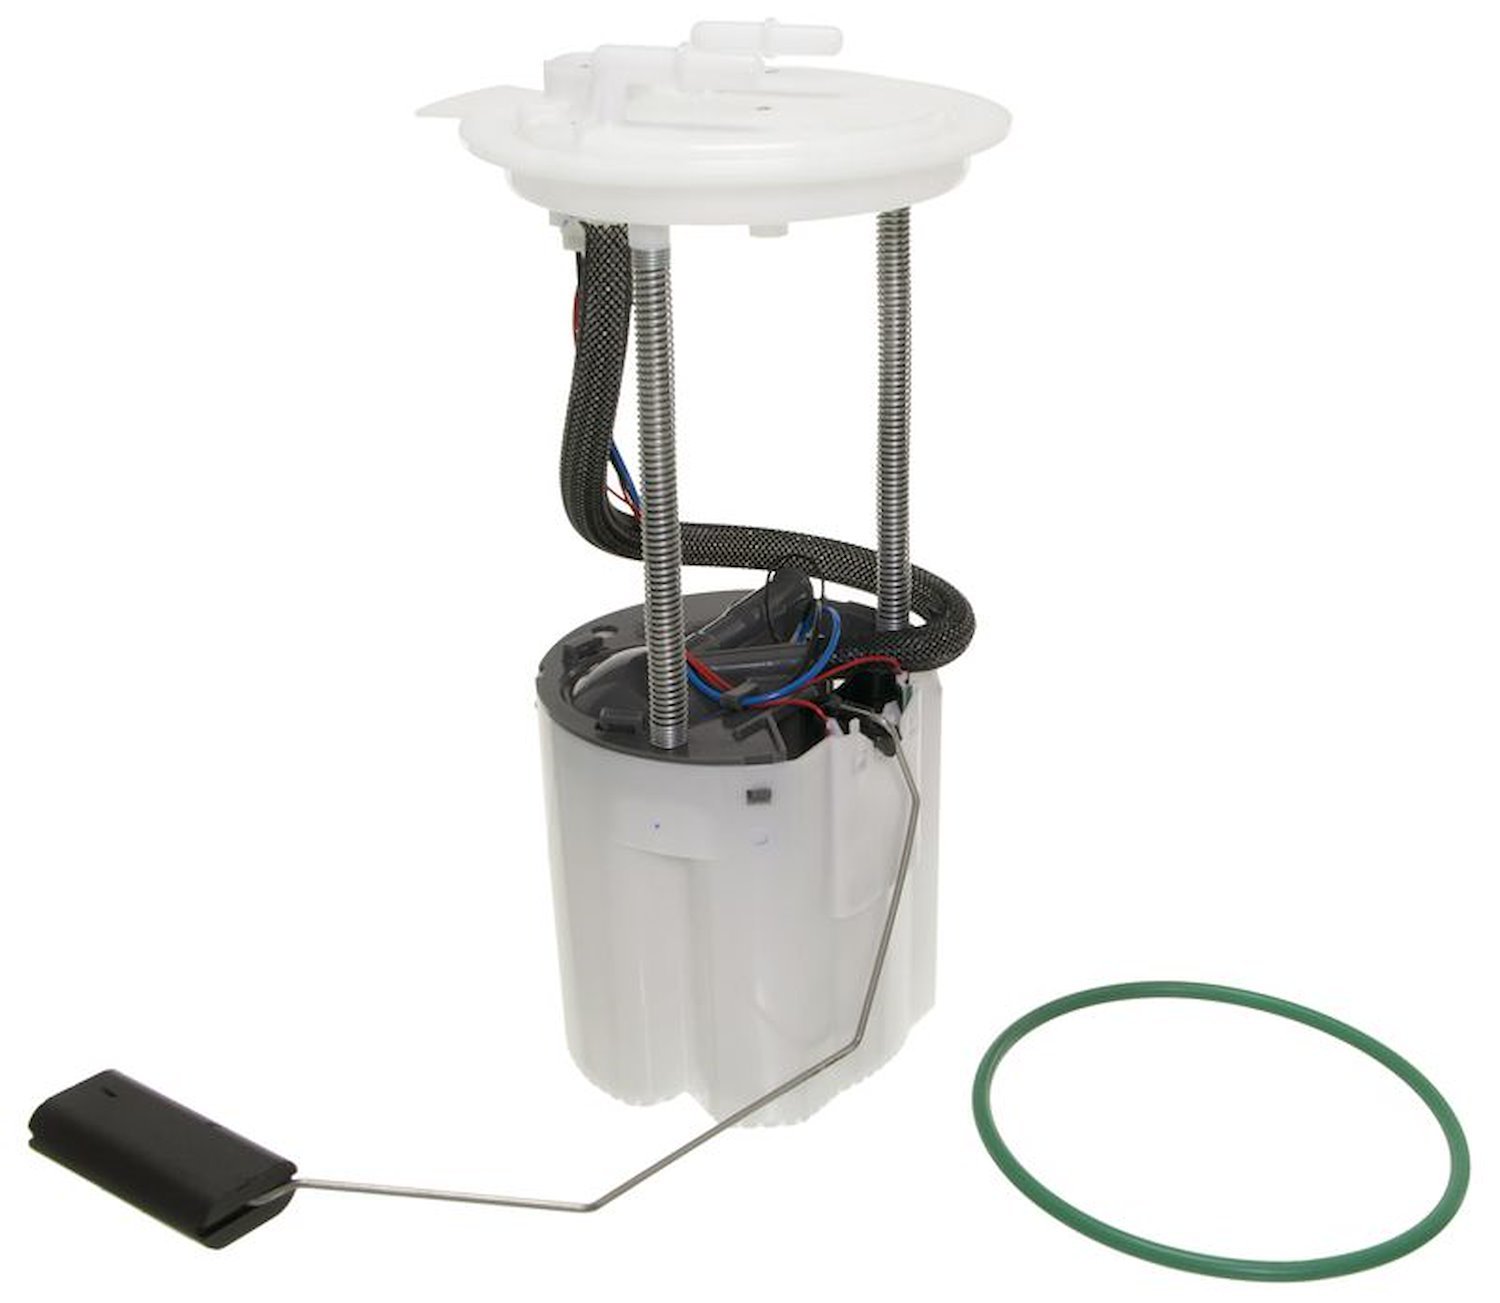 OE Ford Replacement Replacement Fuel Pump Module Assembly for 2009 Ford Escape/Mercury Mariner/2011-2012 Ford Escape